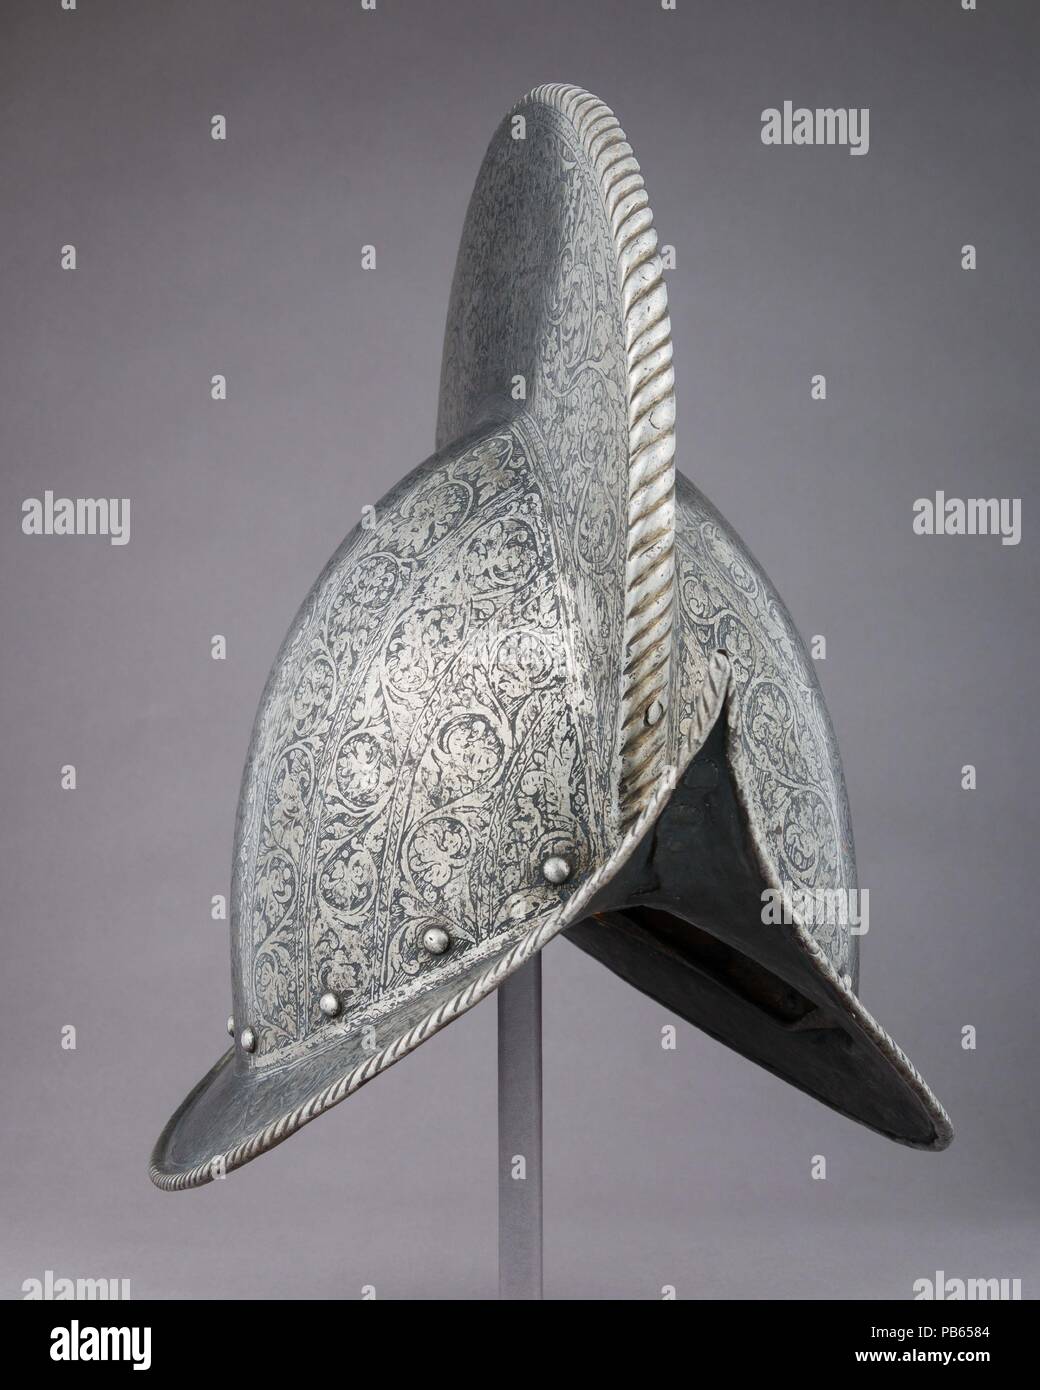 Morion. Culture: French. Dimensions: H. 13 1/16 in. (33.2 cm); W. 9 11/16 in. (24.6 cm); D. 13 1/2 in. (34.3 cm); Wt. 3 lb. 15 oz. (1773 g). Date: ca. 1575. Museum: Metropolitan Museum of Art, New York, USA. Stock Photo